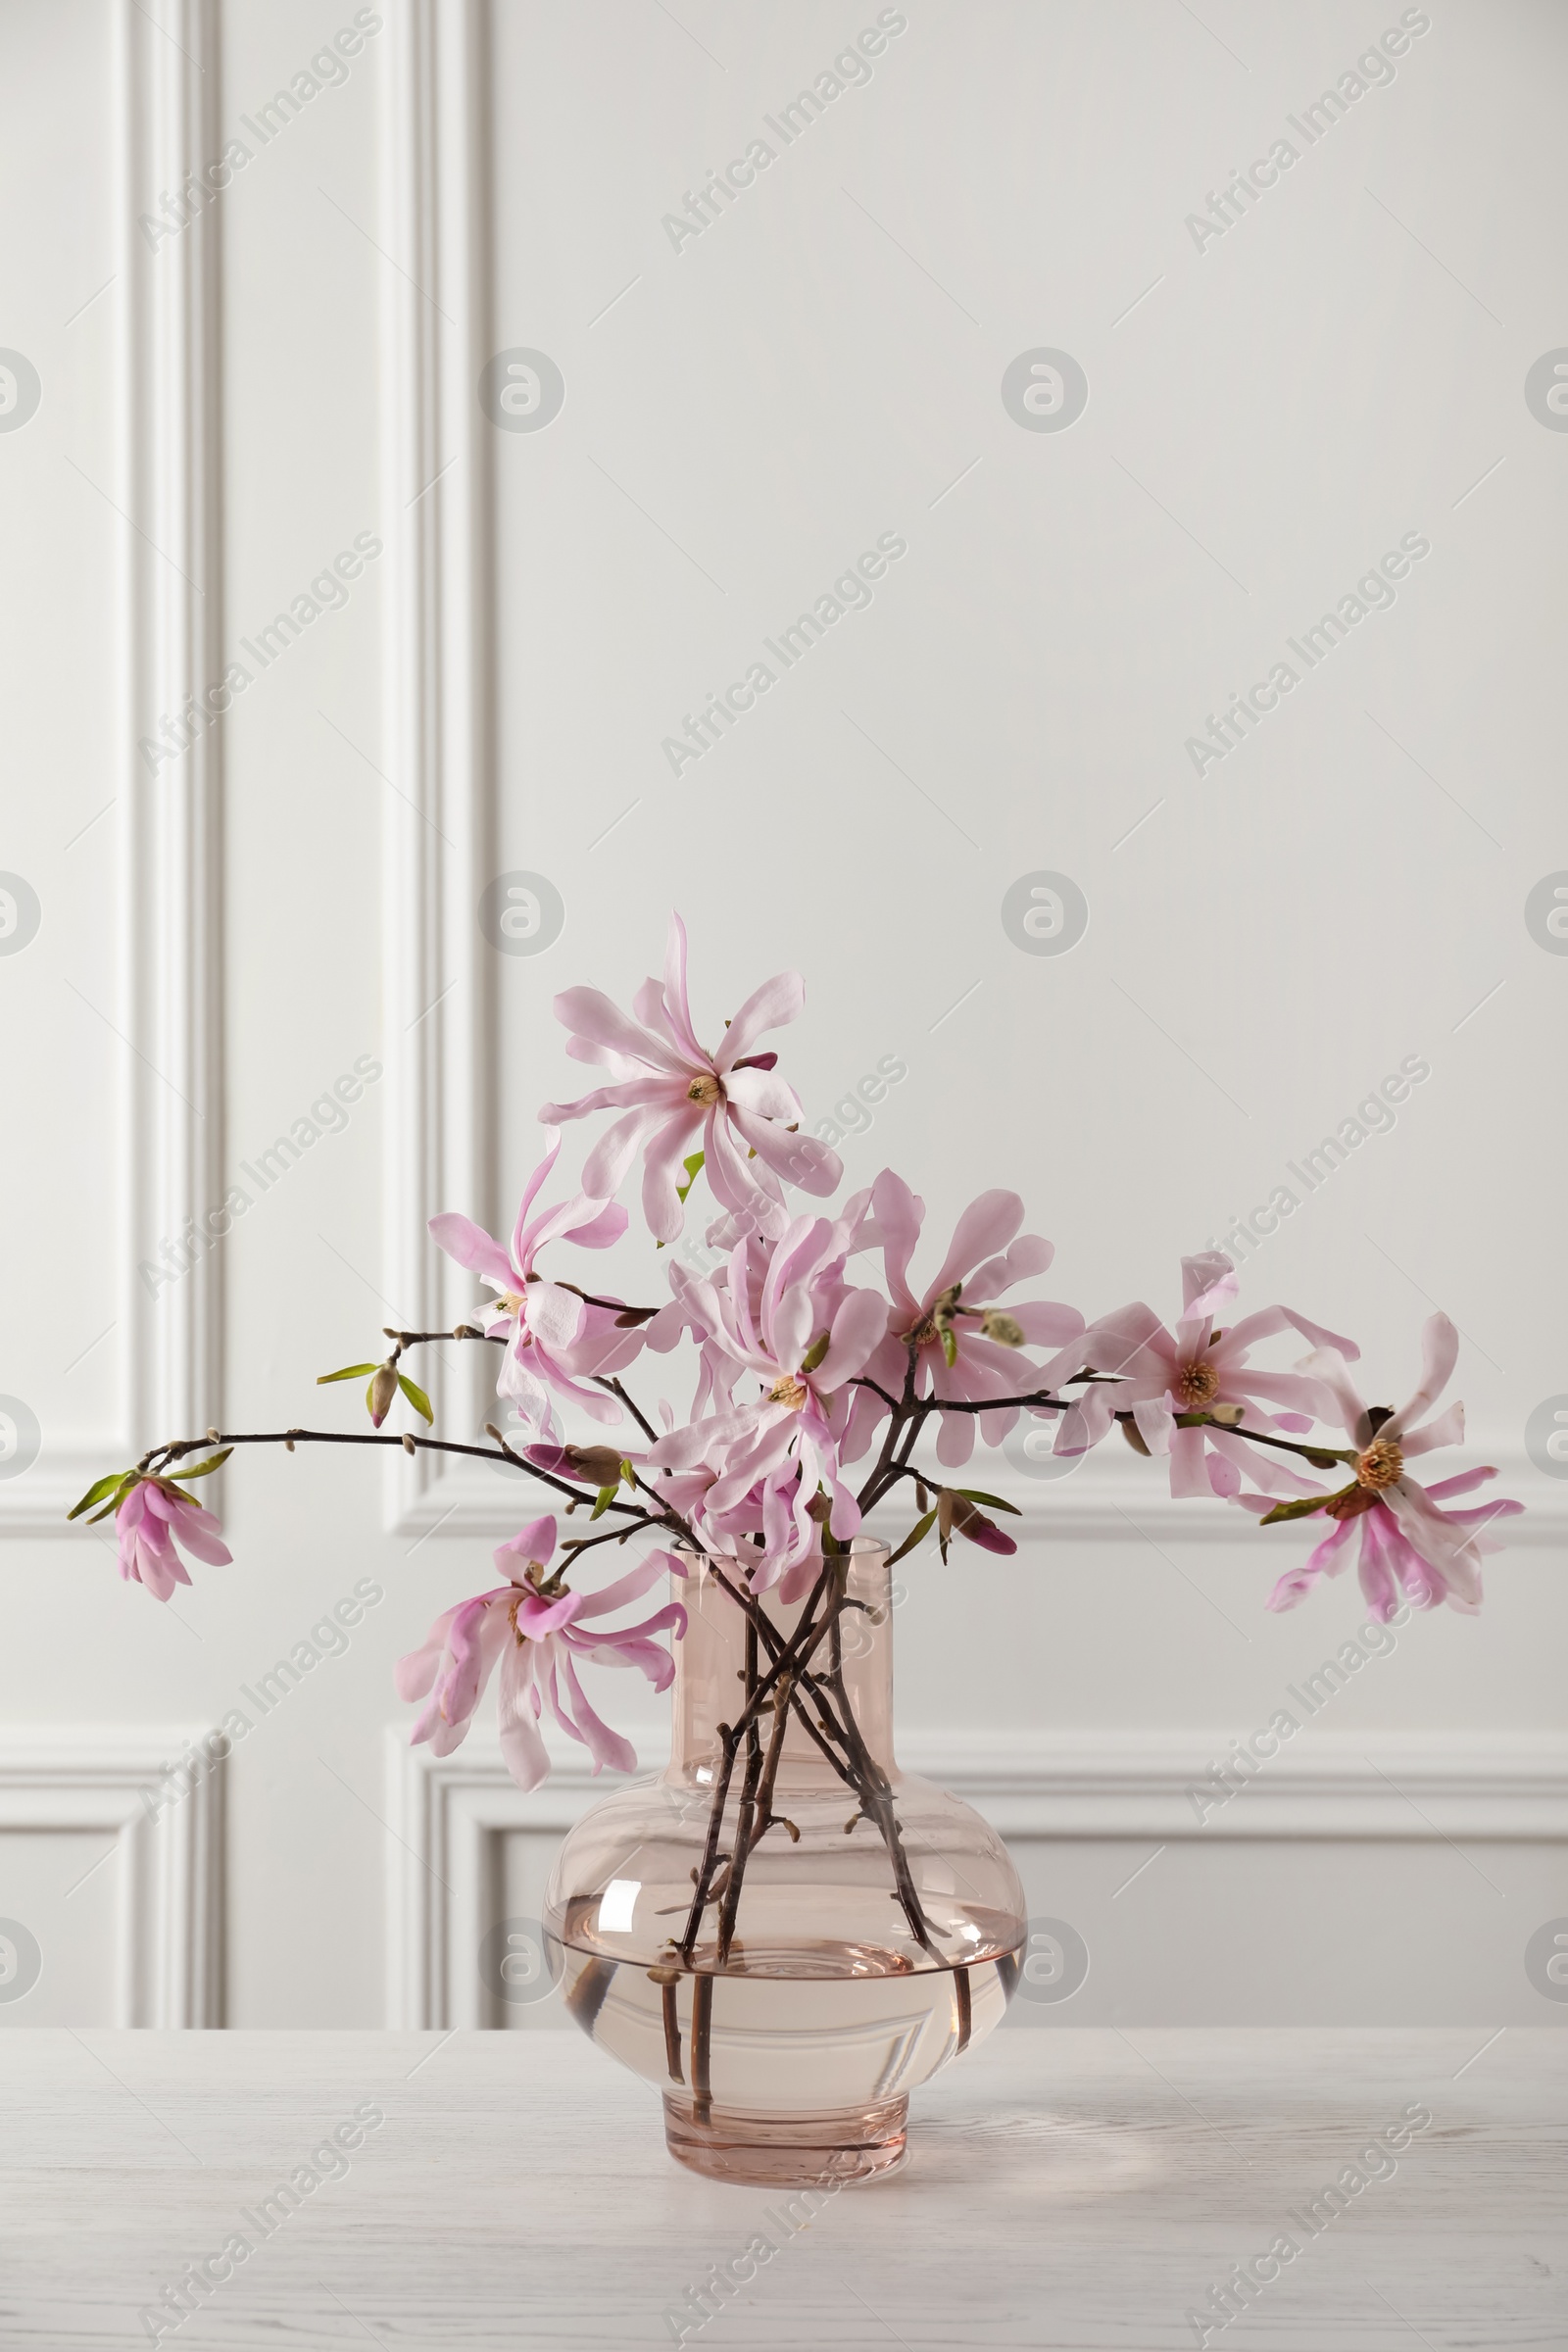 Photo of Magnolia tree branches with beautiful flowers in glass vase on white wooden table